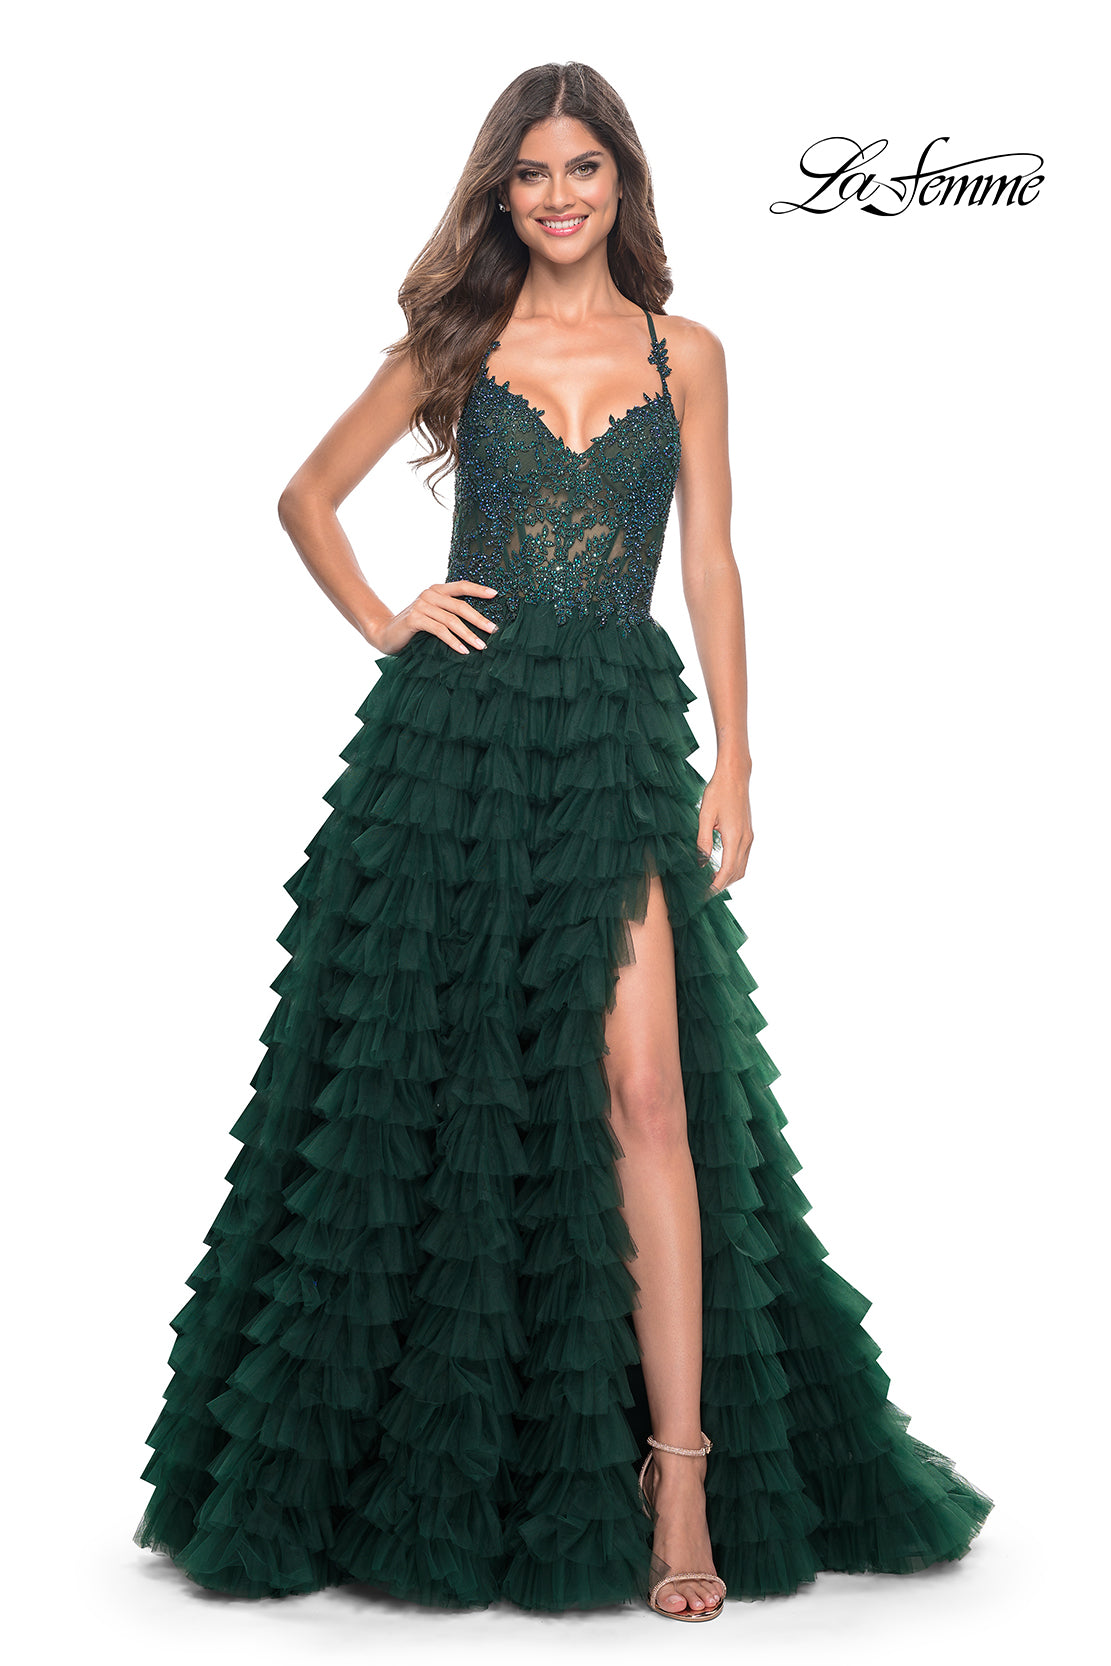 La-Femme-32128-Sweetheart-Neckline-Lace-up-Back-High-Slit-Lace-Tulle-Ball-Gowns-Dark-Emerald-Evening-Dress-B-Chic-Fashions-Prom-Dress